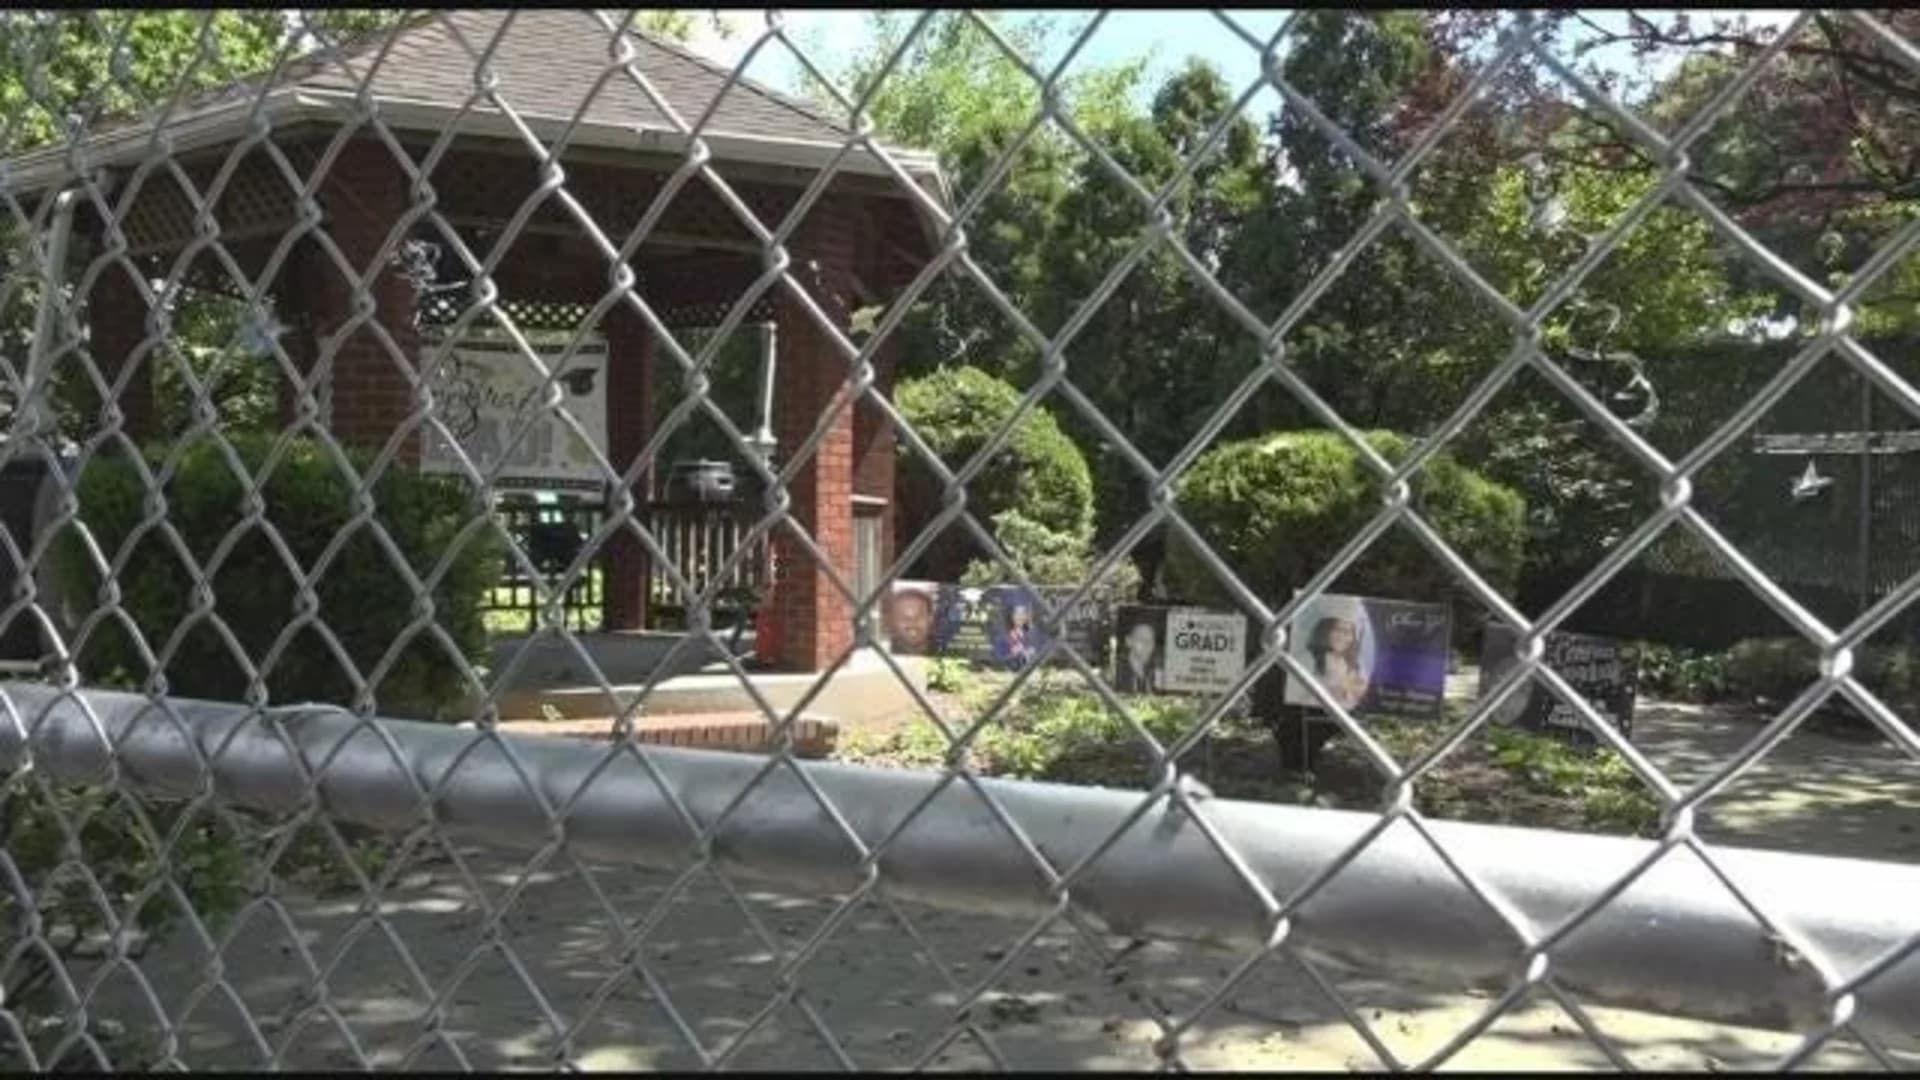 Neighbors say they've been locked out of community garden, but tenant association pushes back